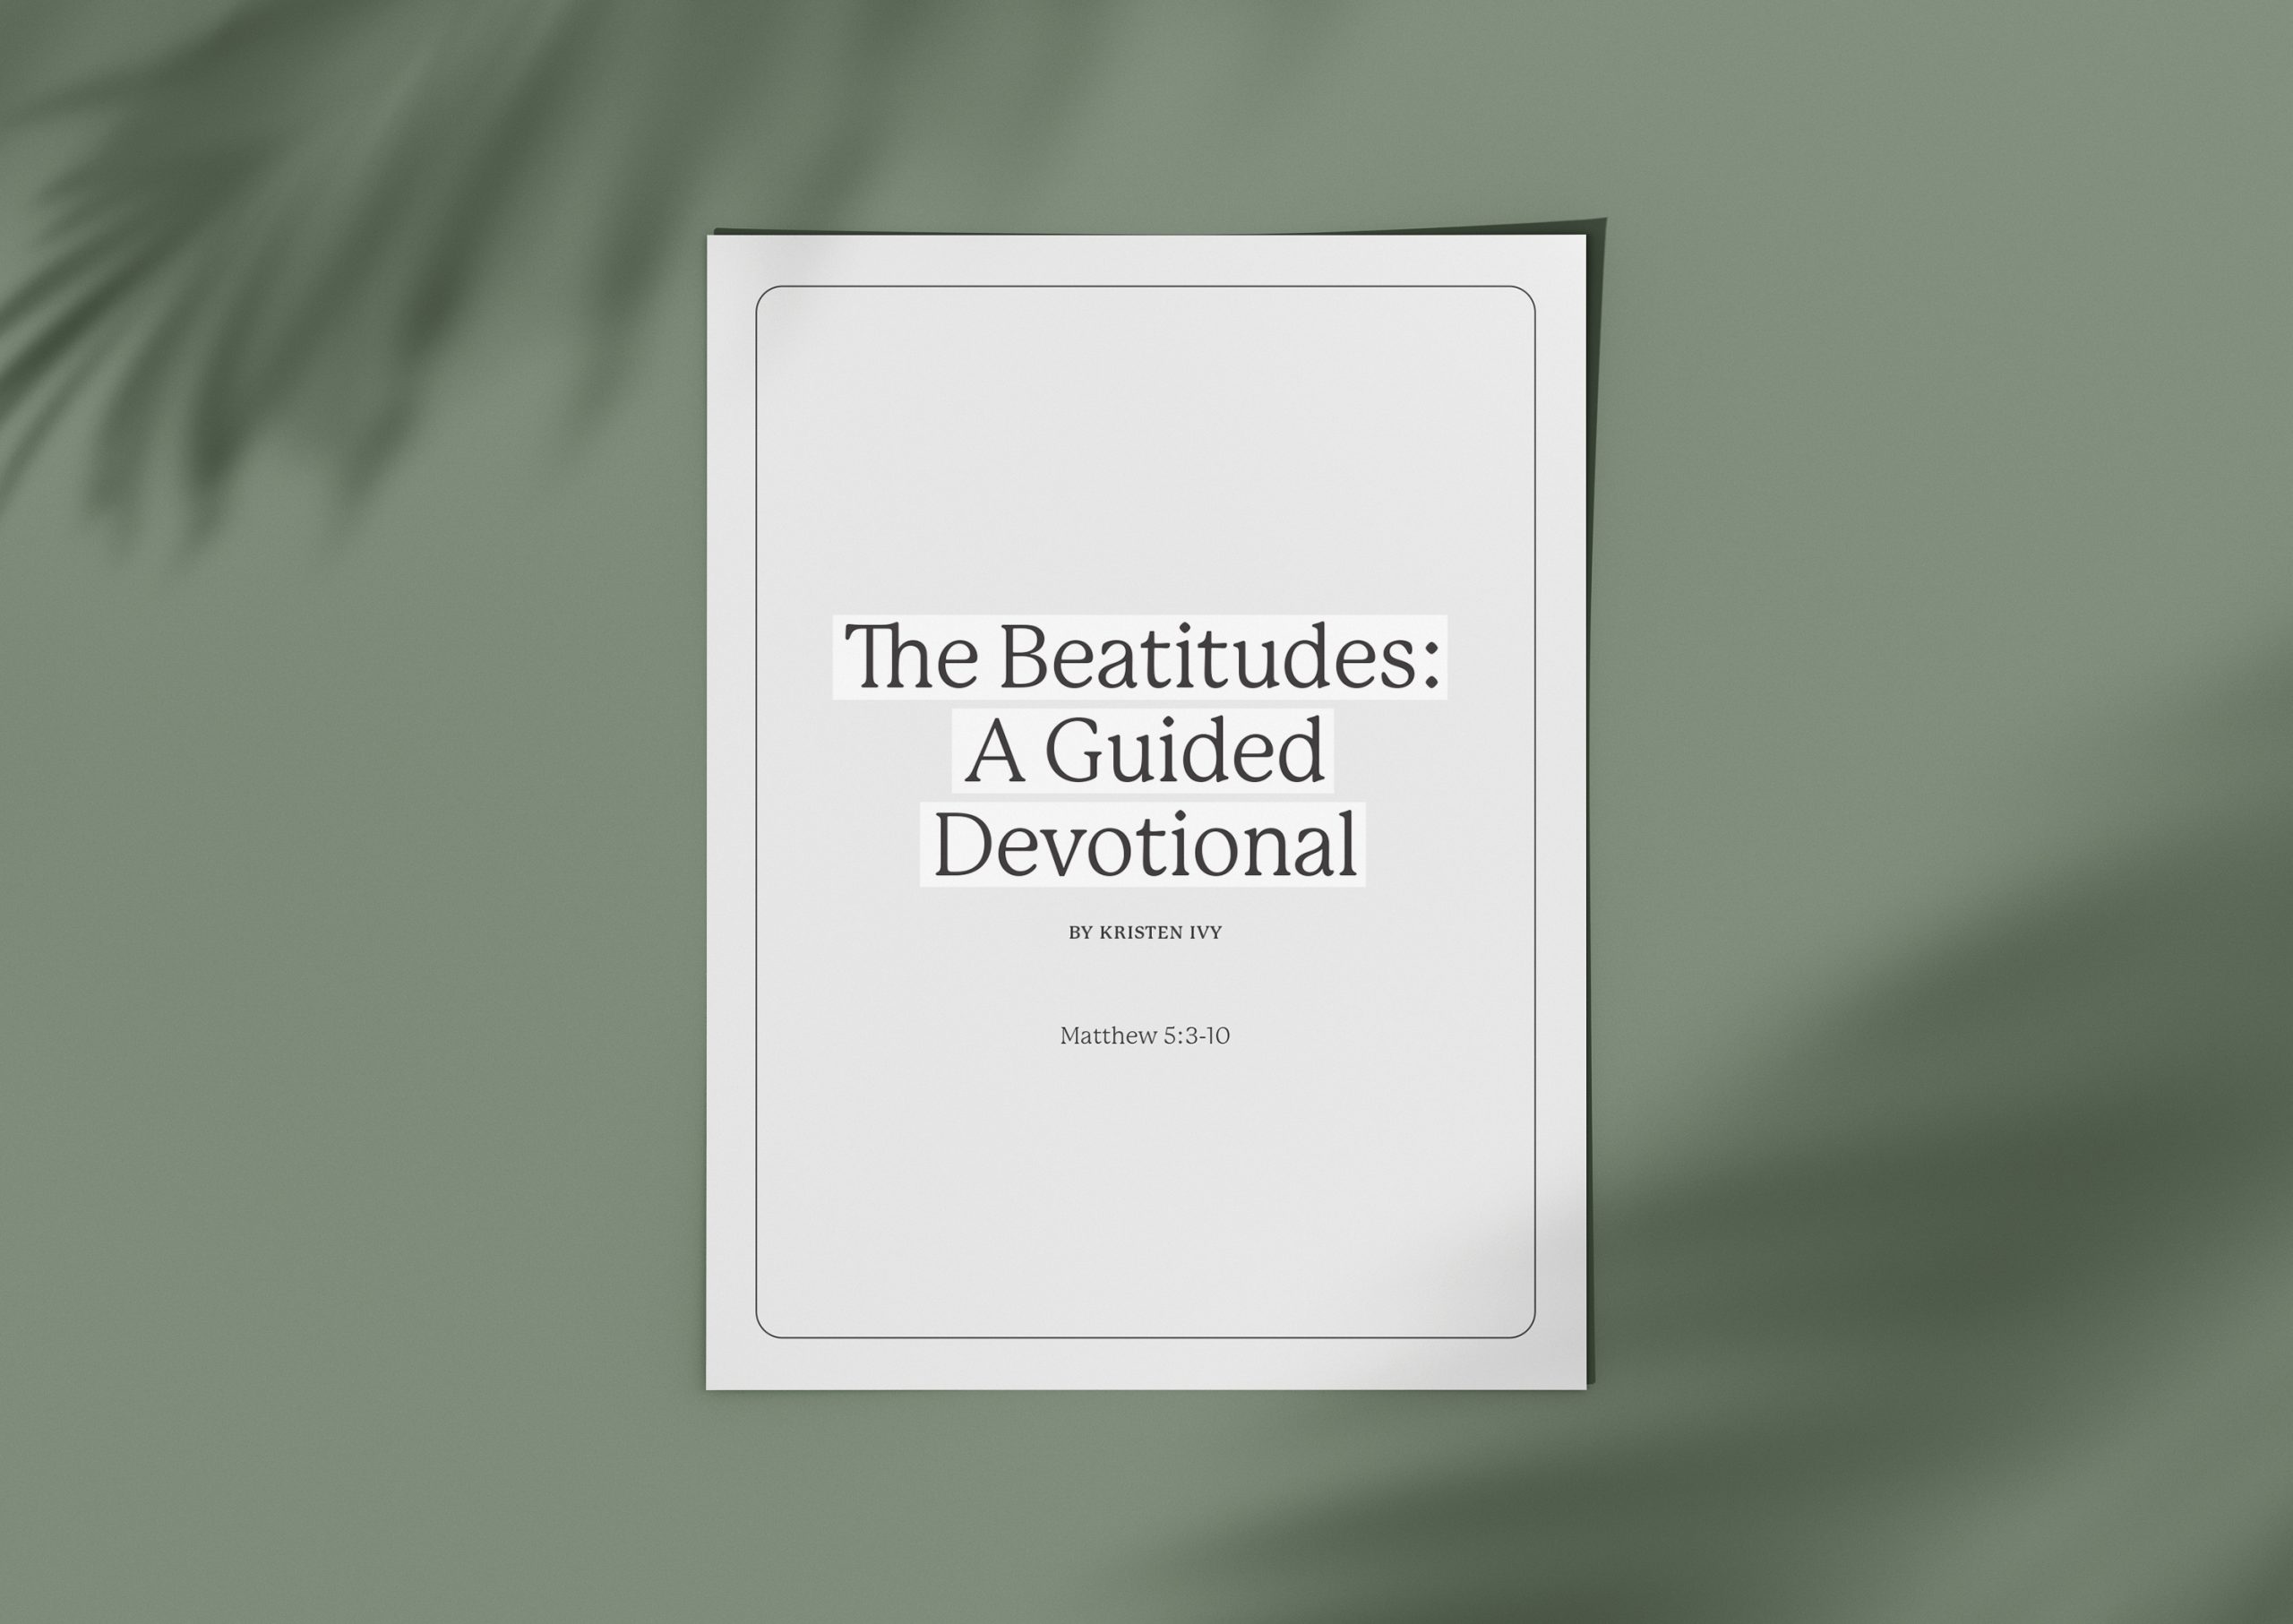 The Beatitudes: A Guided Devotional